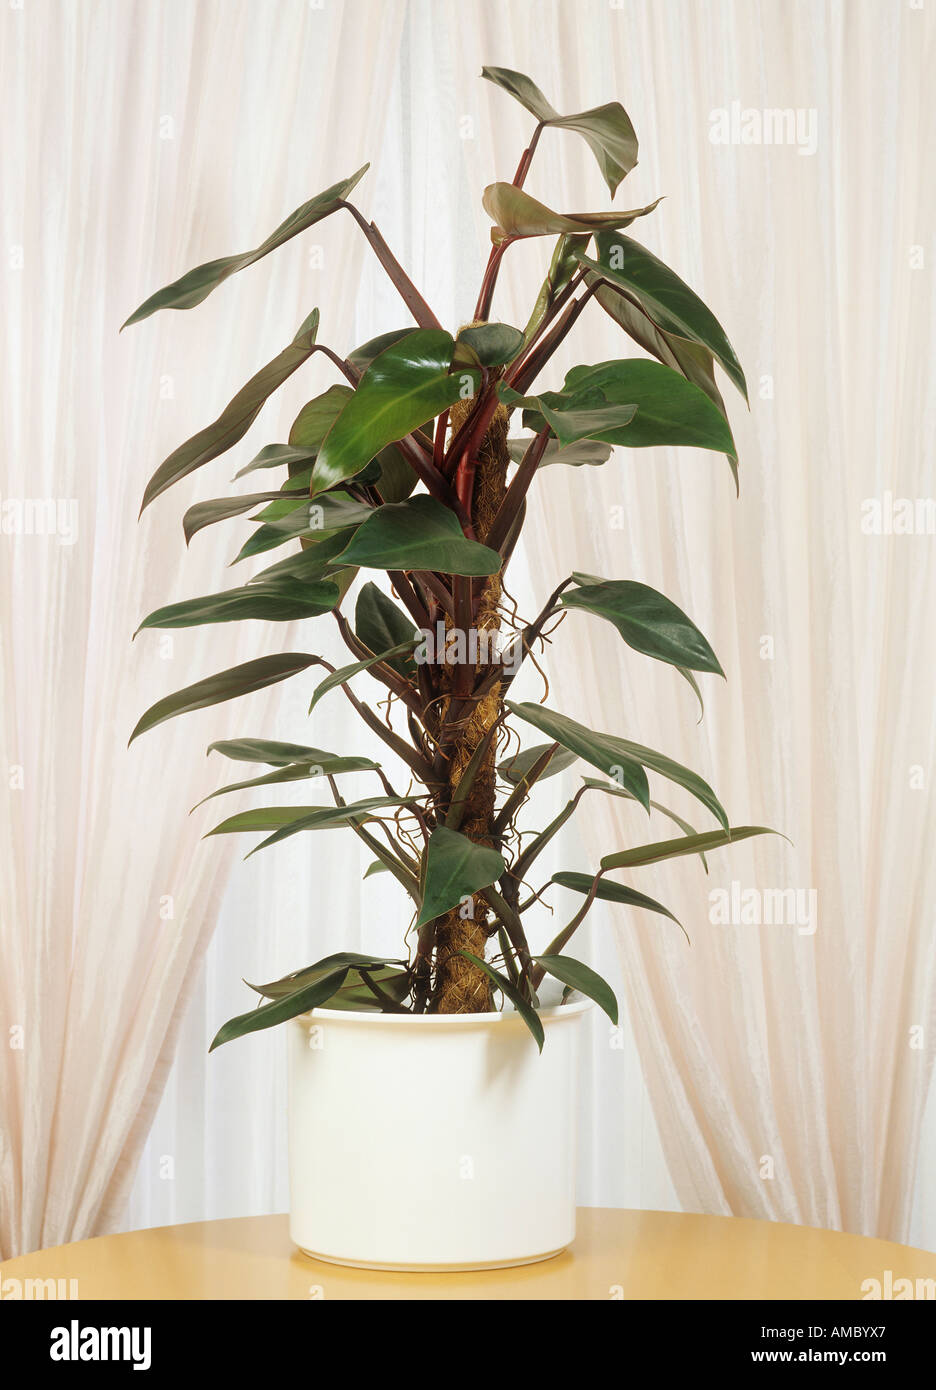 philodendron / Philodendron erubescens Stock Photo